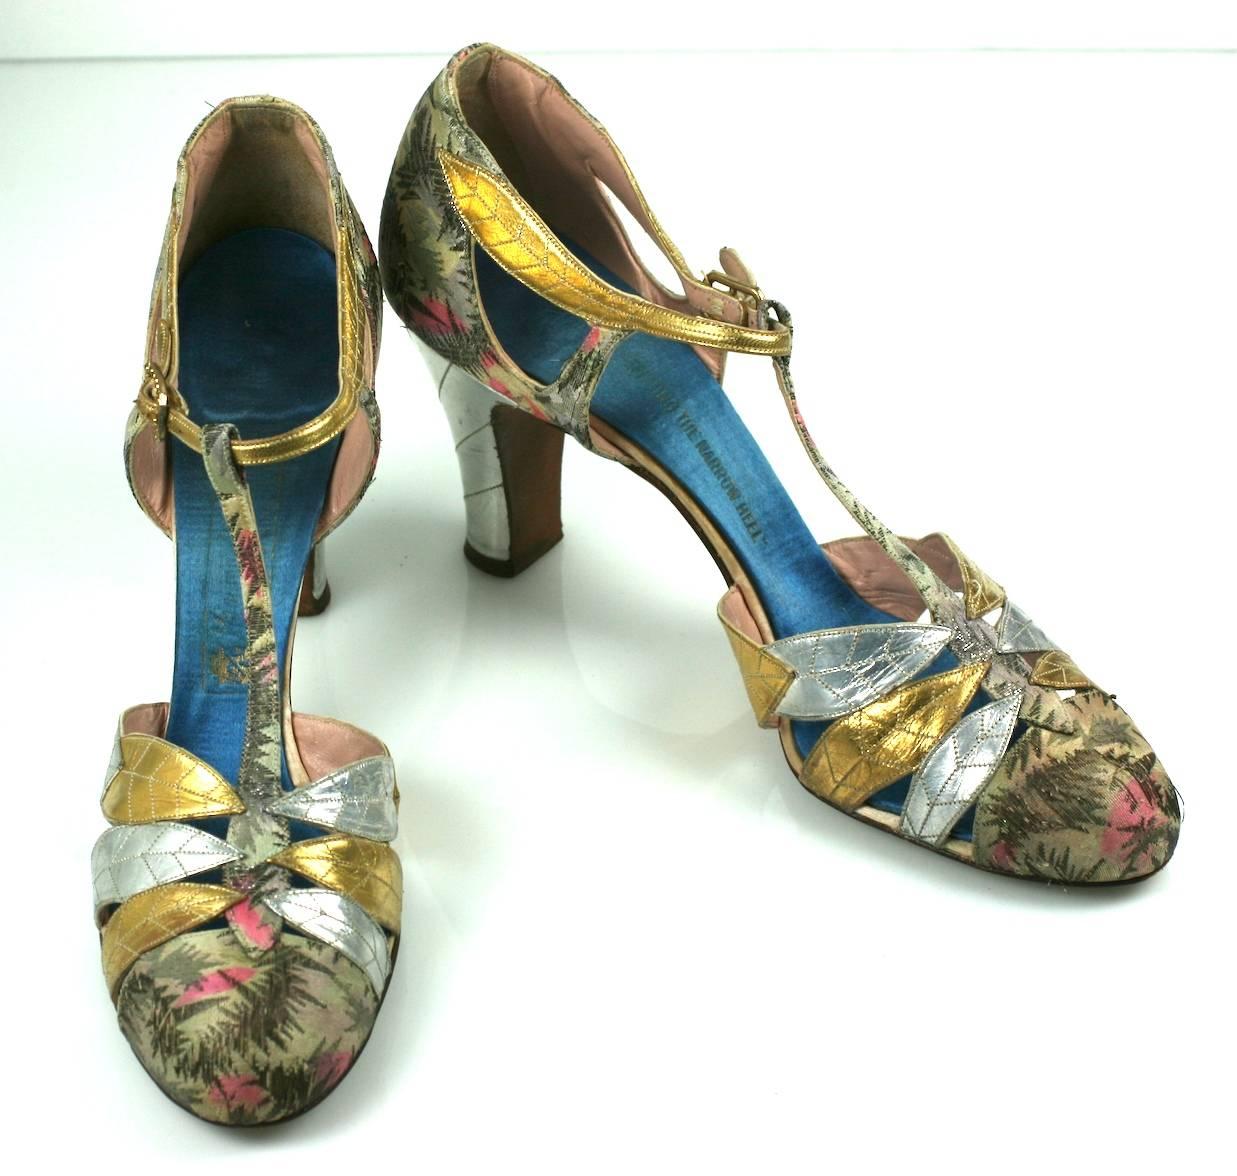 Art Deco Lame and Gilt Kid Evening Shoes, 1920's. Gold and silver kid leather leaf motifs are applied over metallic lame with top stitched silver kid heels . 
Length from toe to back of heel (not sole measurement). 8.5